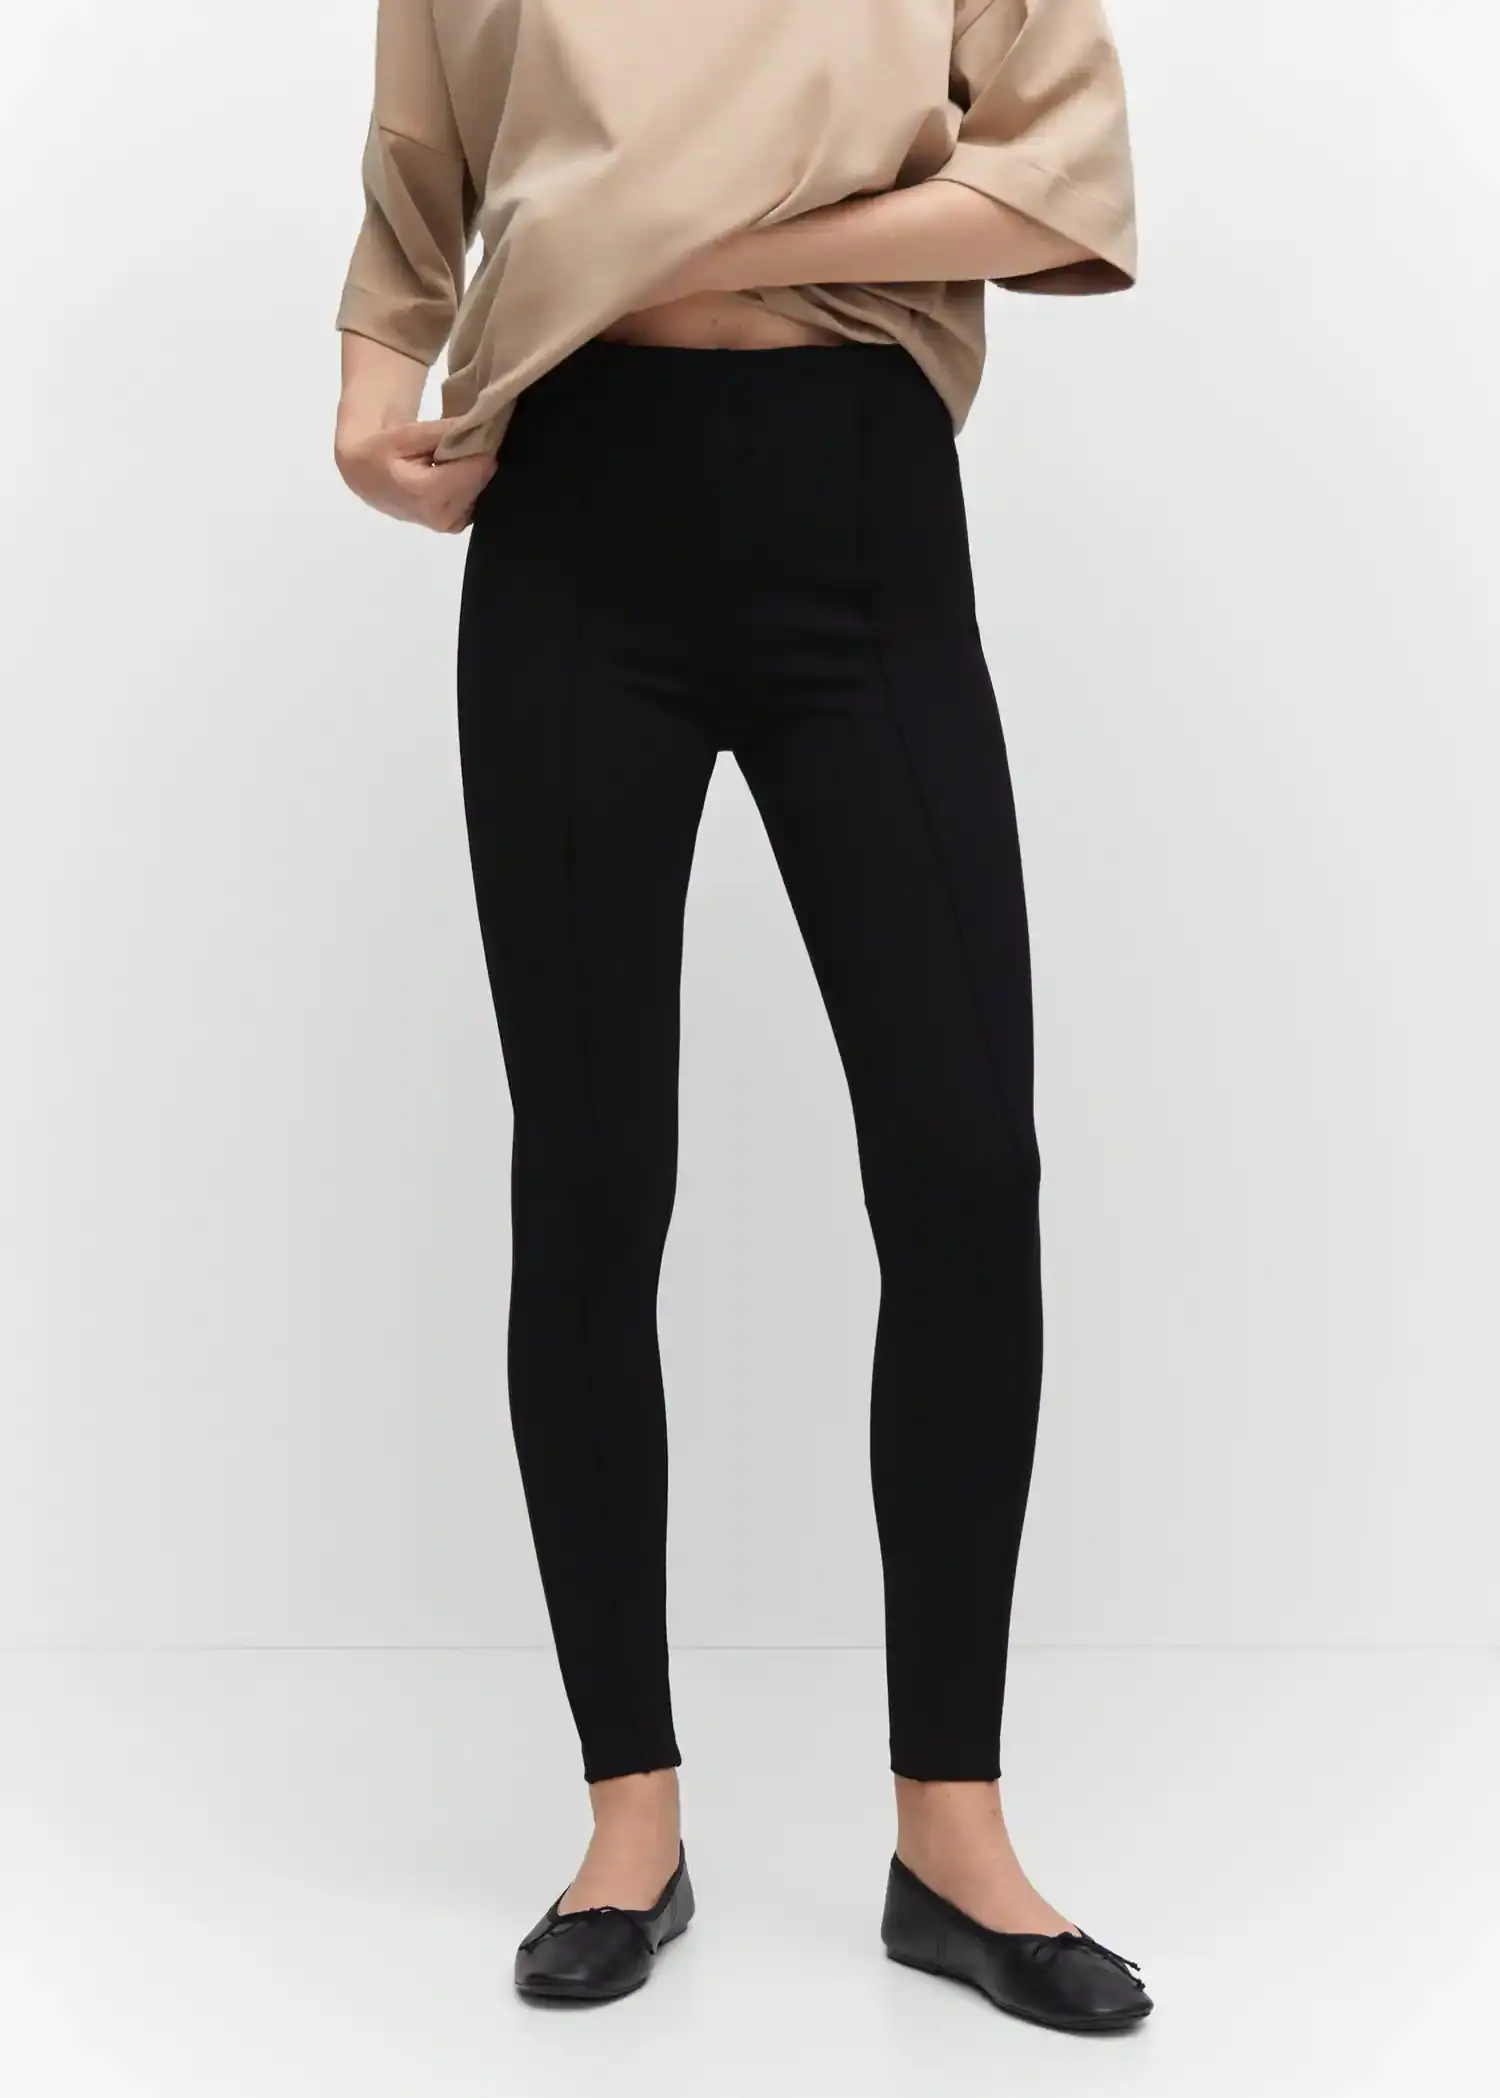 Mango Pleated skinny leggings. a person wearing black pants and a tan shirt. 